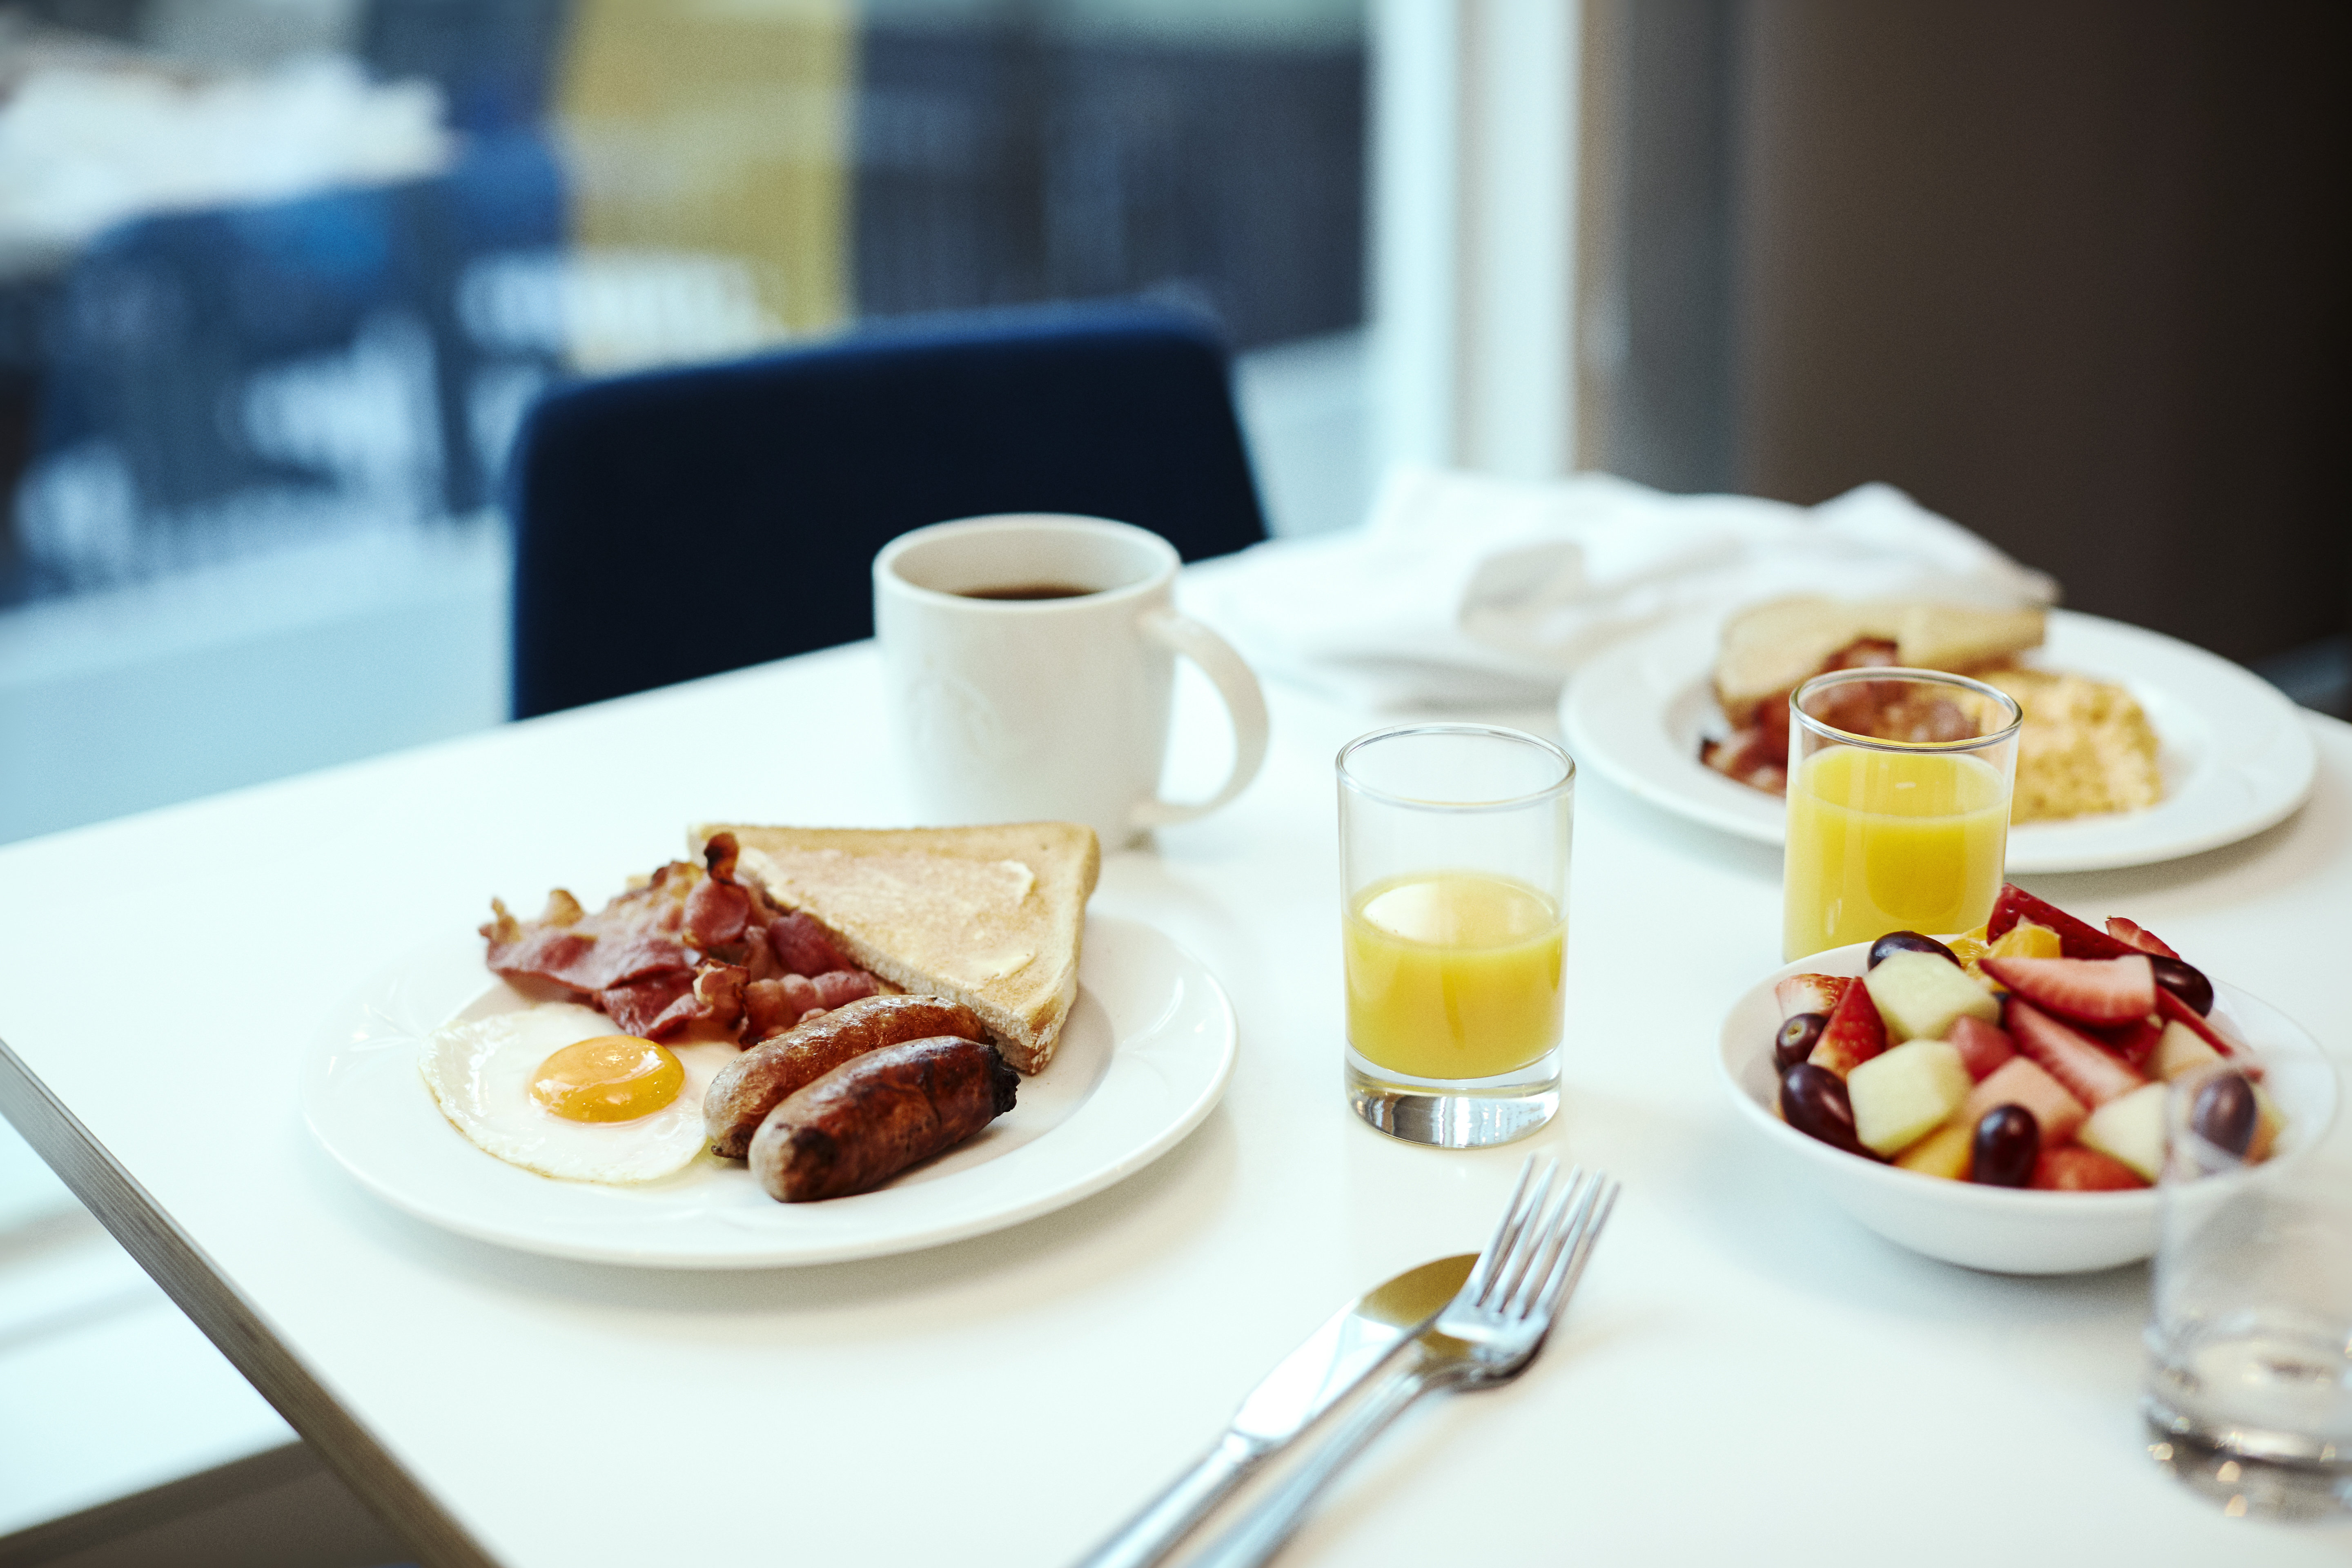 Start your day with a fresh delicious breakfast.